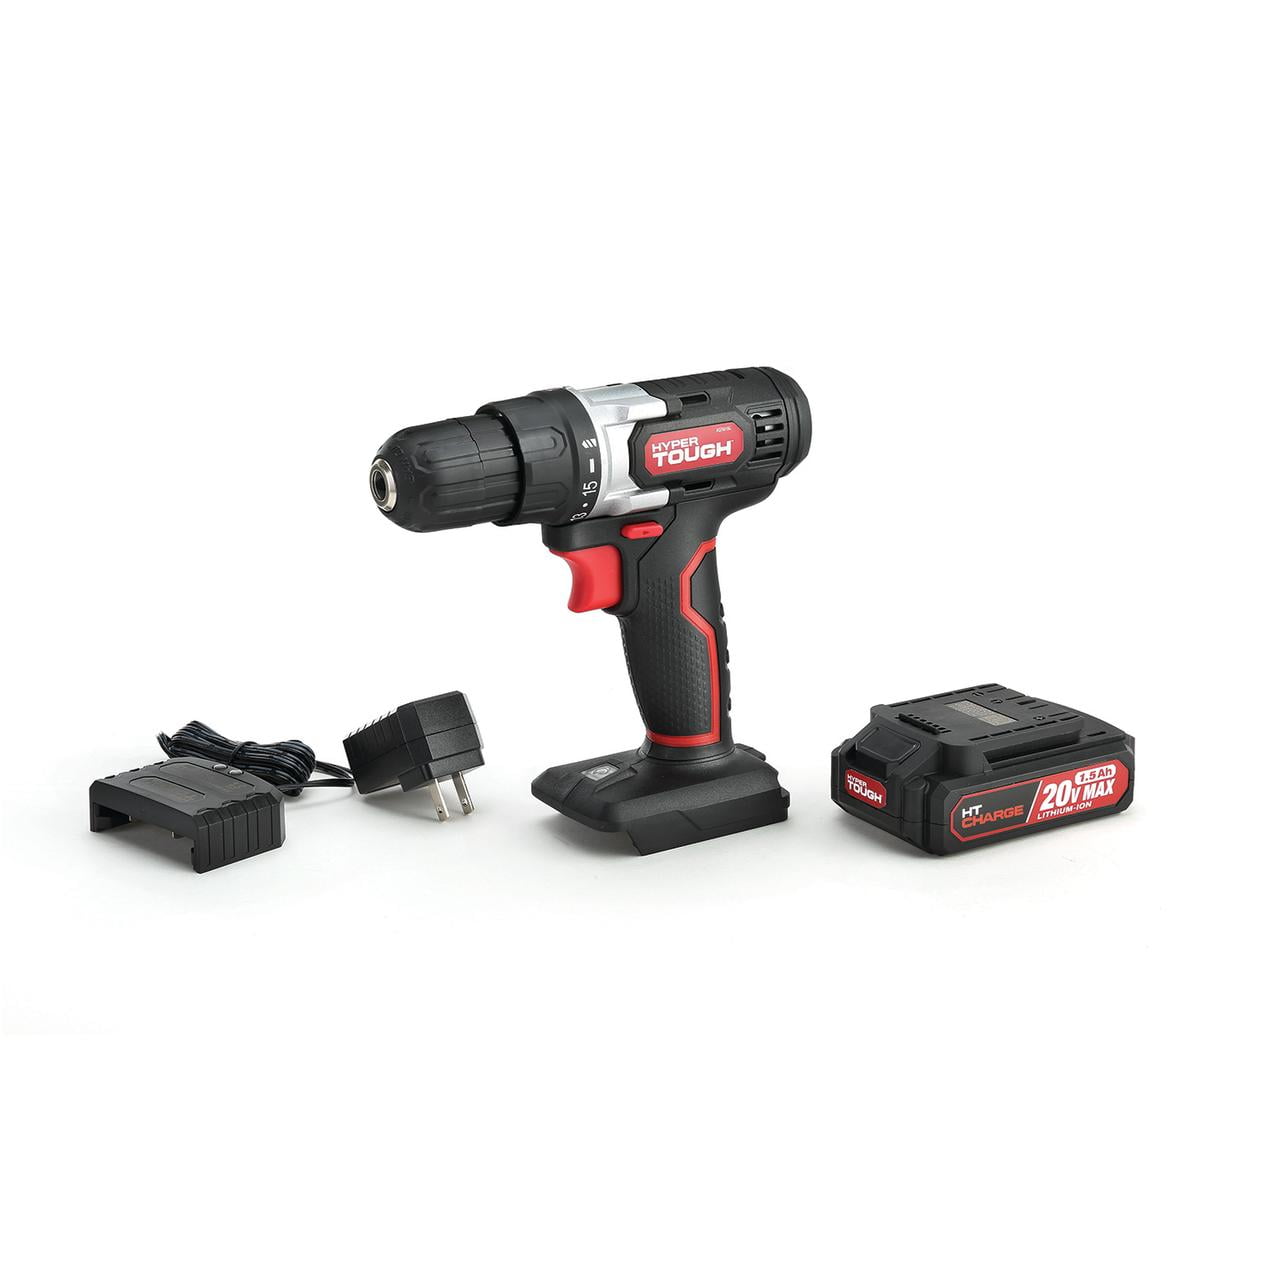 Hyper Tough 20V Max Lithium-Ion Cordless Drill, Variable Speed with 1.5Ah Lithium-ion Battery and Charger